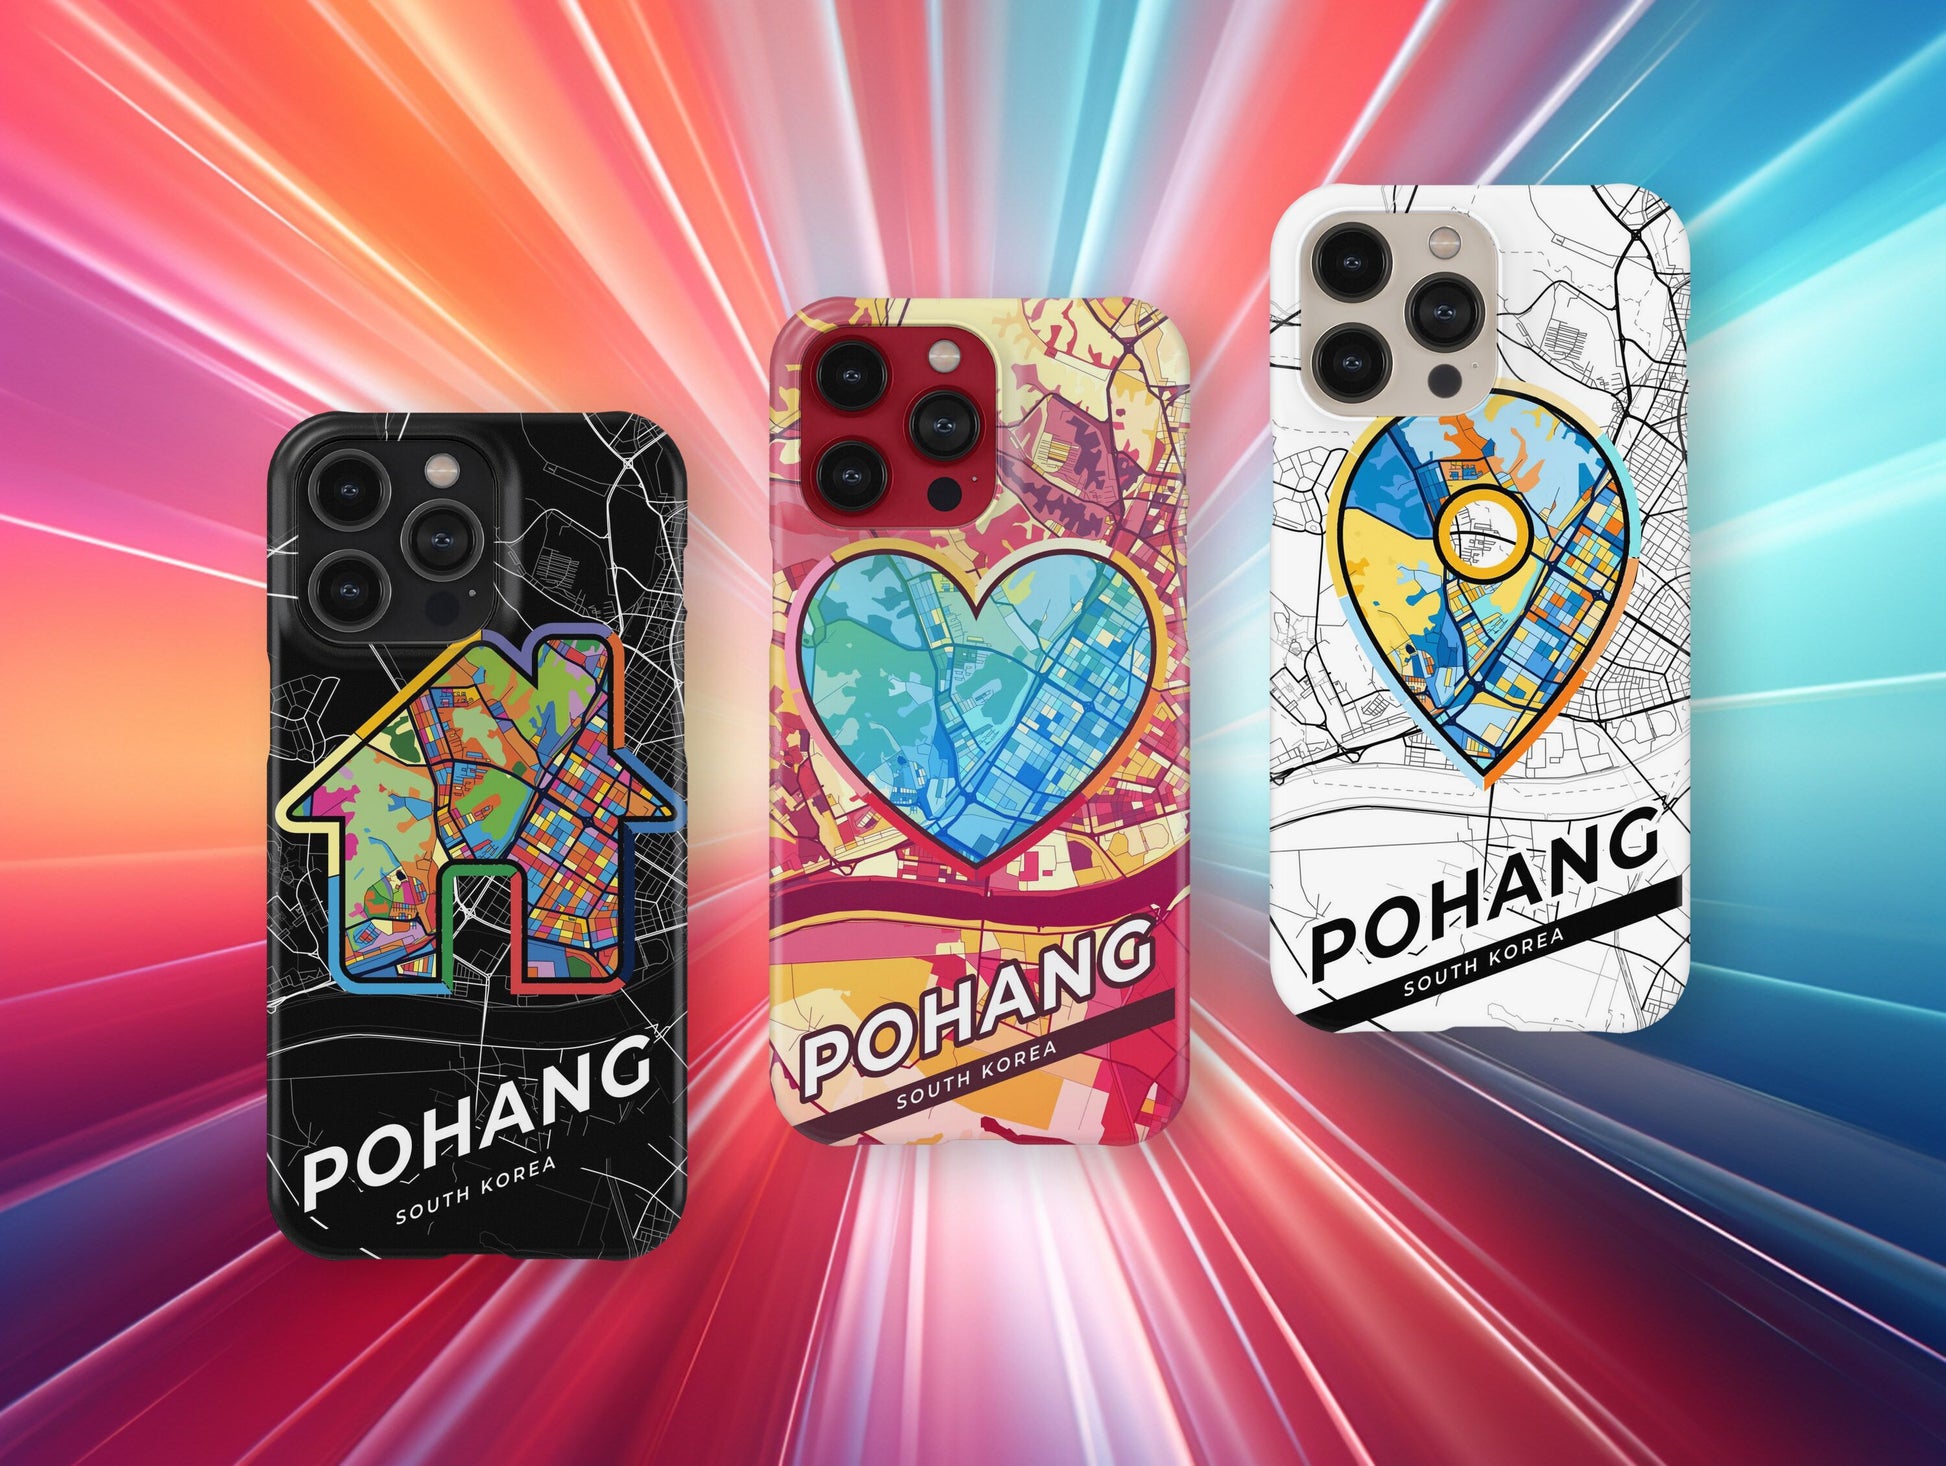 Pohang South Korea slim phone case with colorful icon. Birthday, wedding or housewarming gift. Couple match cases.